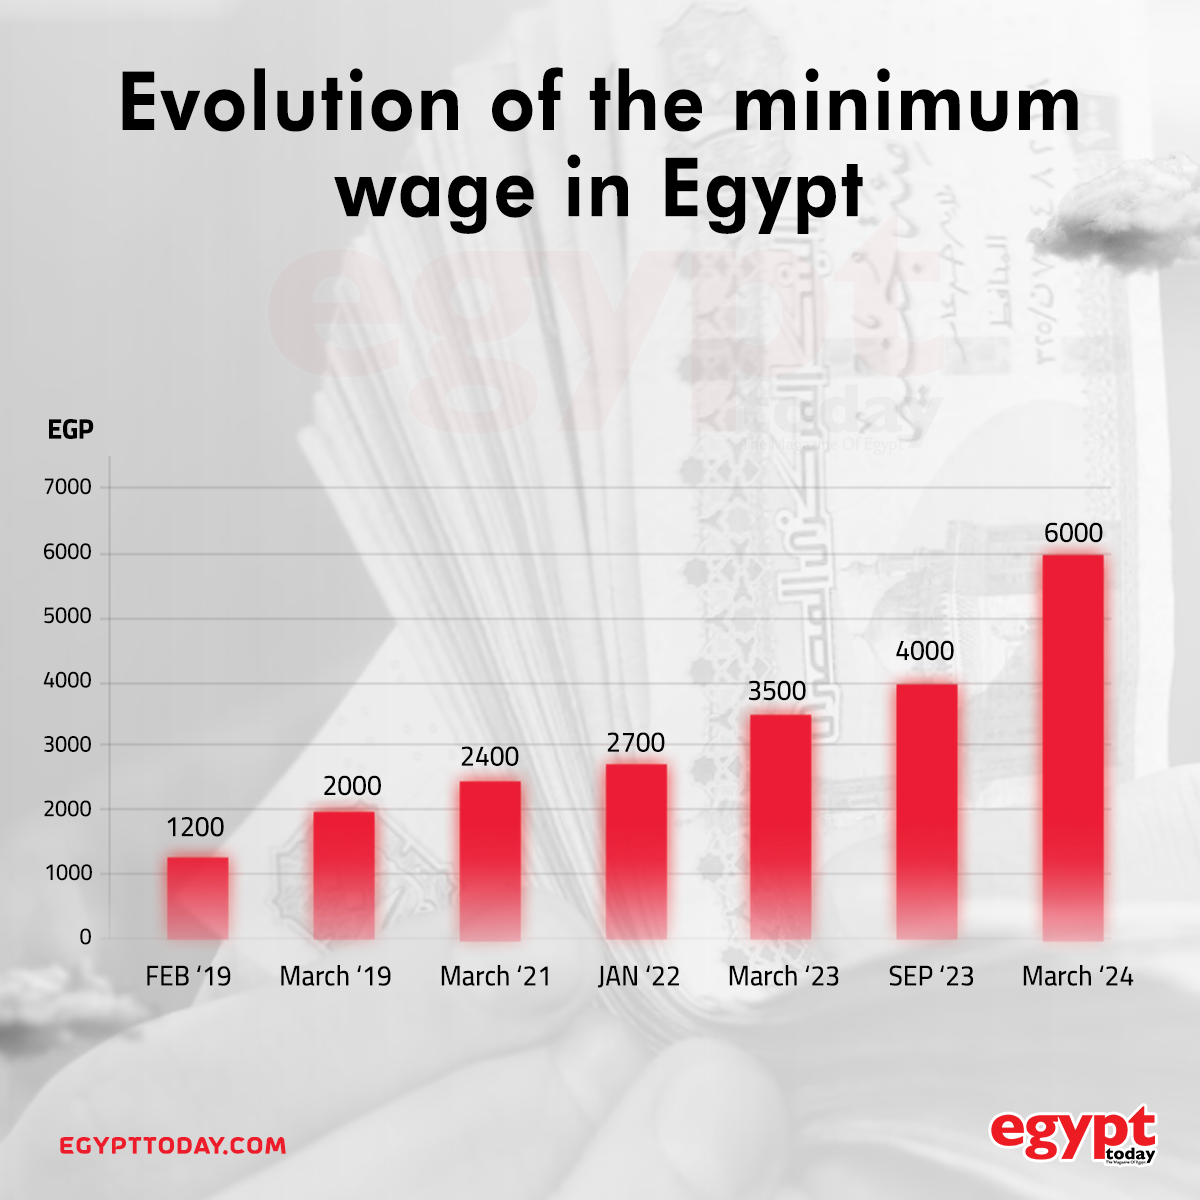 Evolution of the minimum wage in Egypt